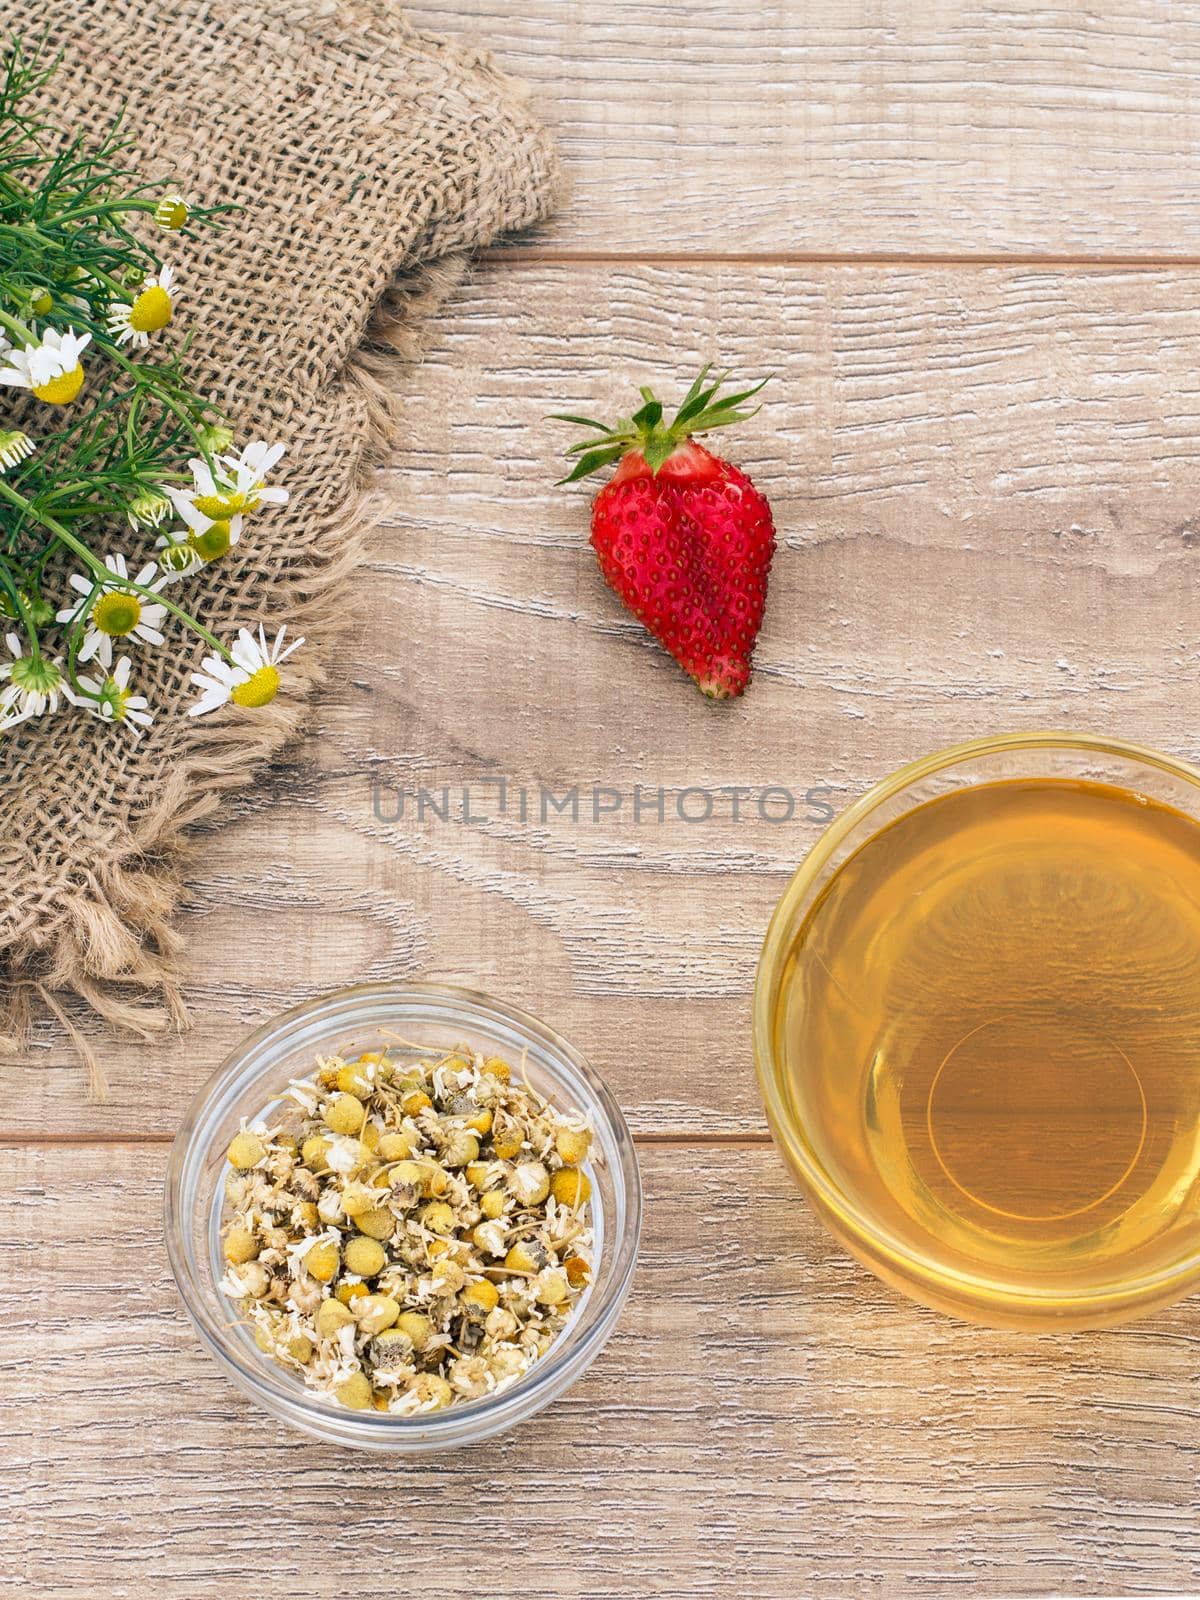 Glass cup of green tea, fresh chamomile flowers, strawberry and a little glass bowl with dry flowers of matricaria chamomilla on the wooden background. Top view.